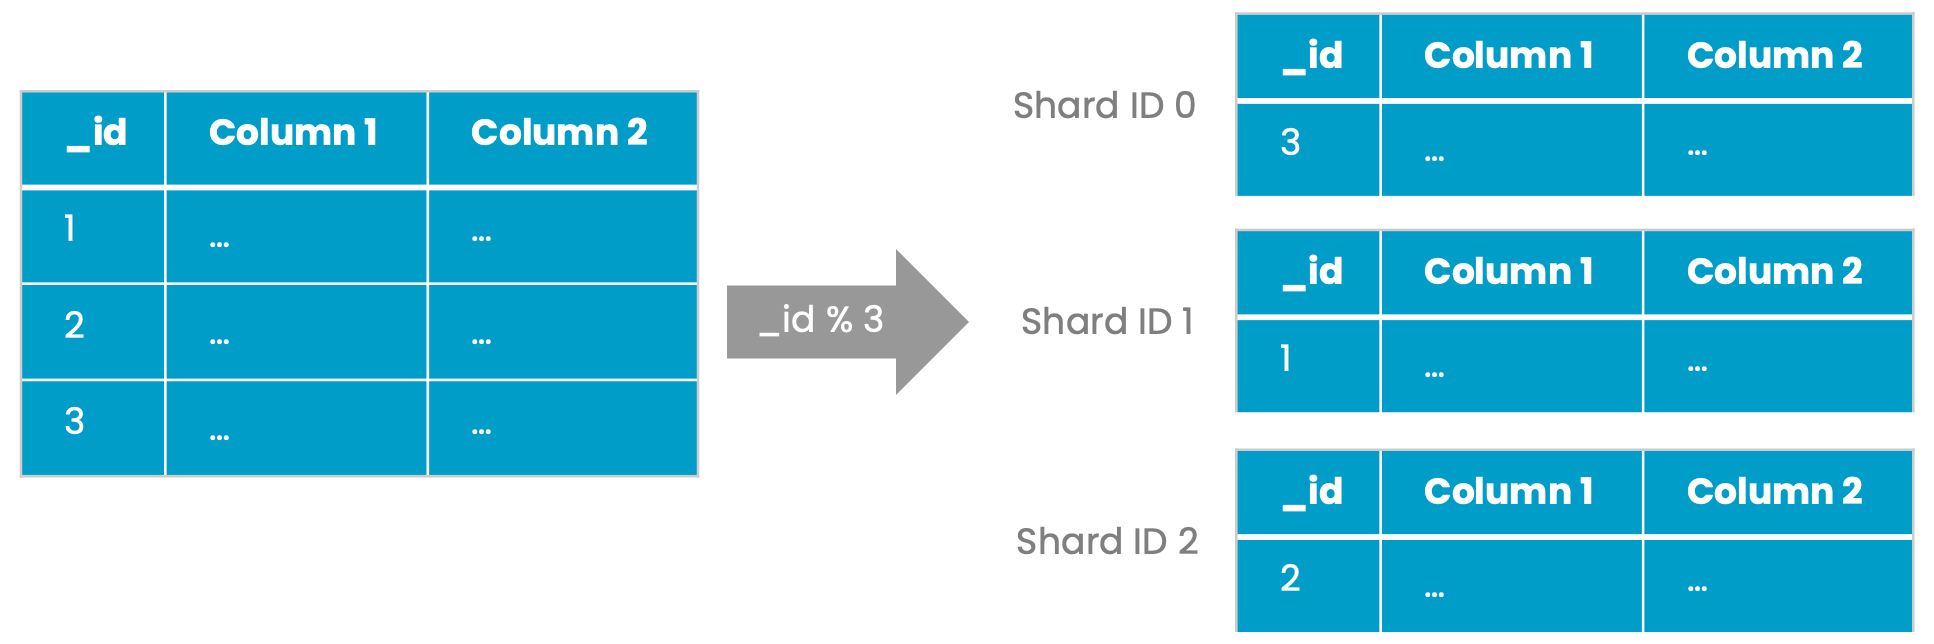 Distribution of rows to three shards based on the system-generated _id column